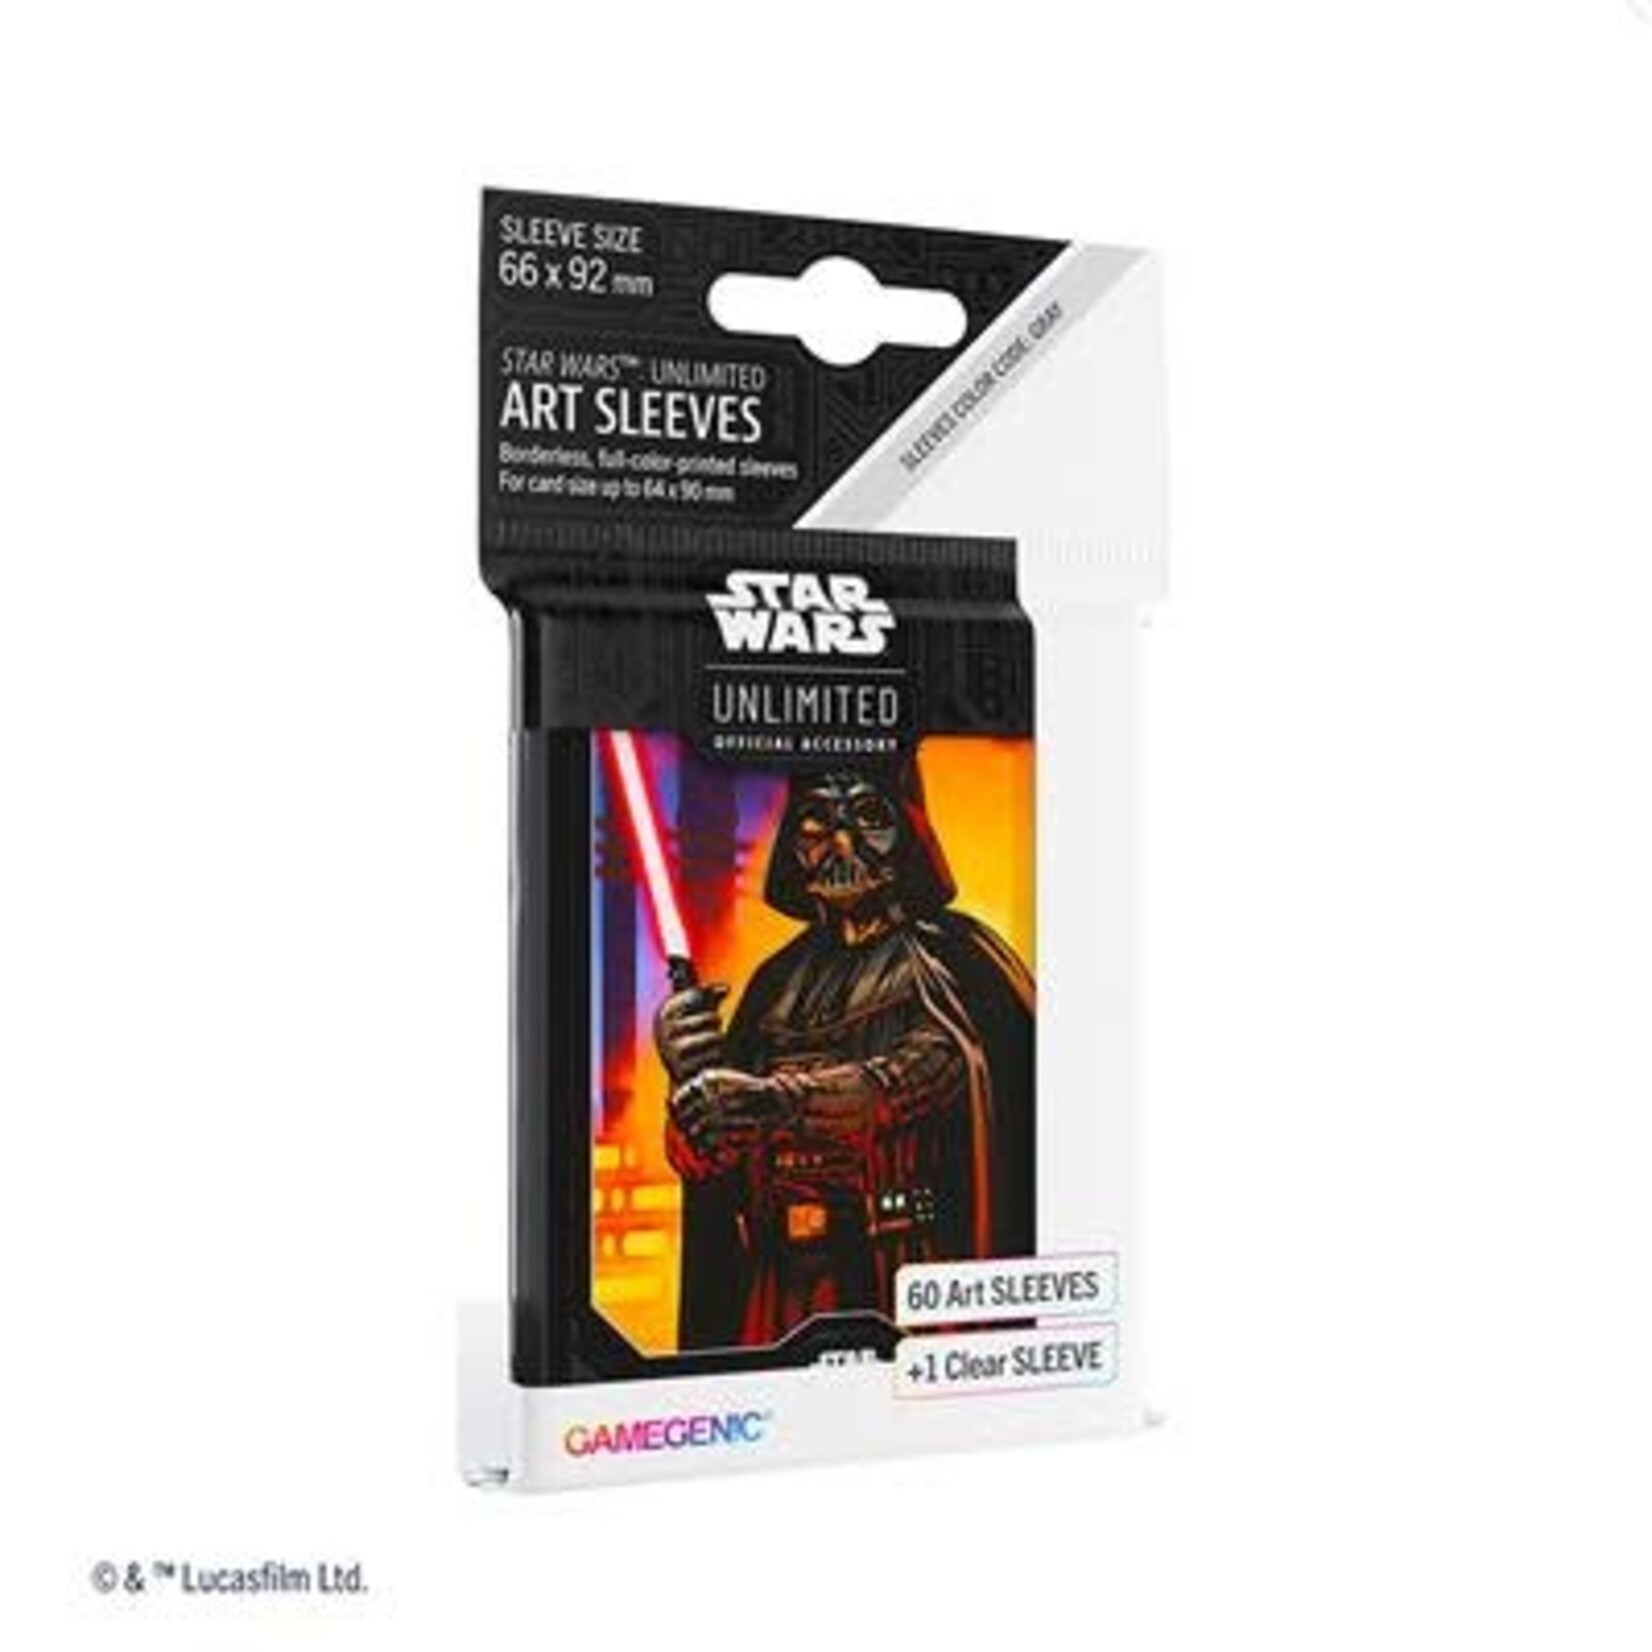 Gamegenic Card Sleeves – Star Wars: Unlimited Art Sleeves (61 Count) Darth Vader